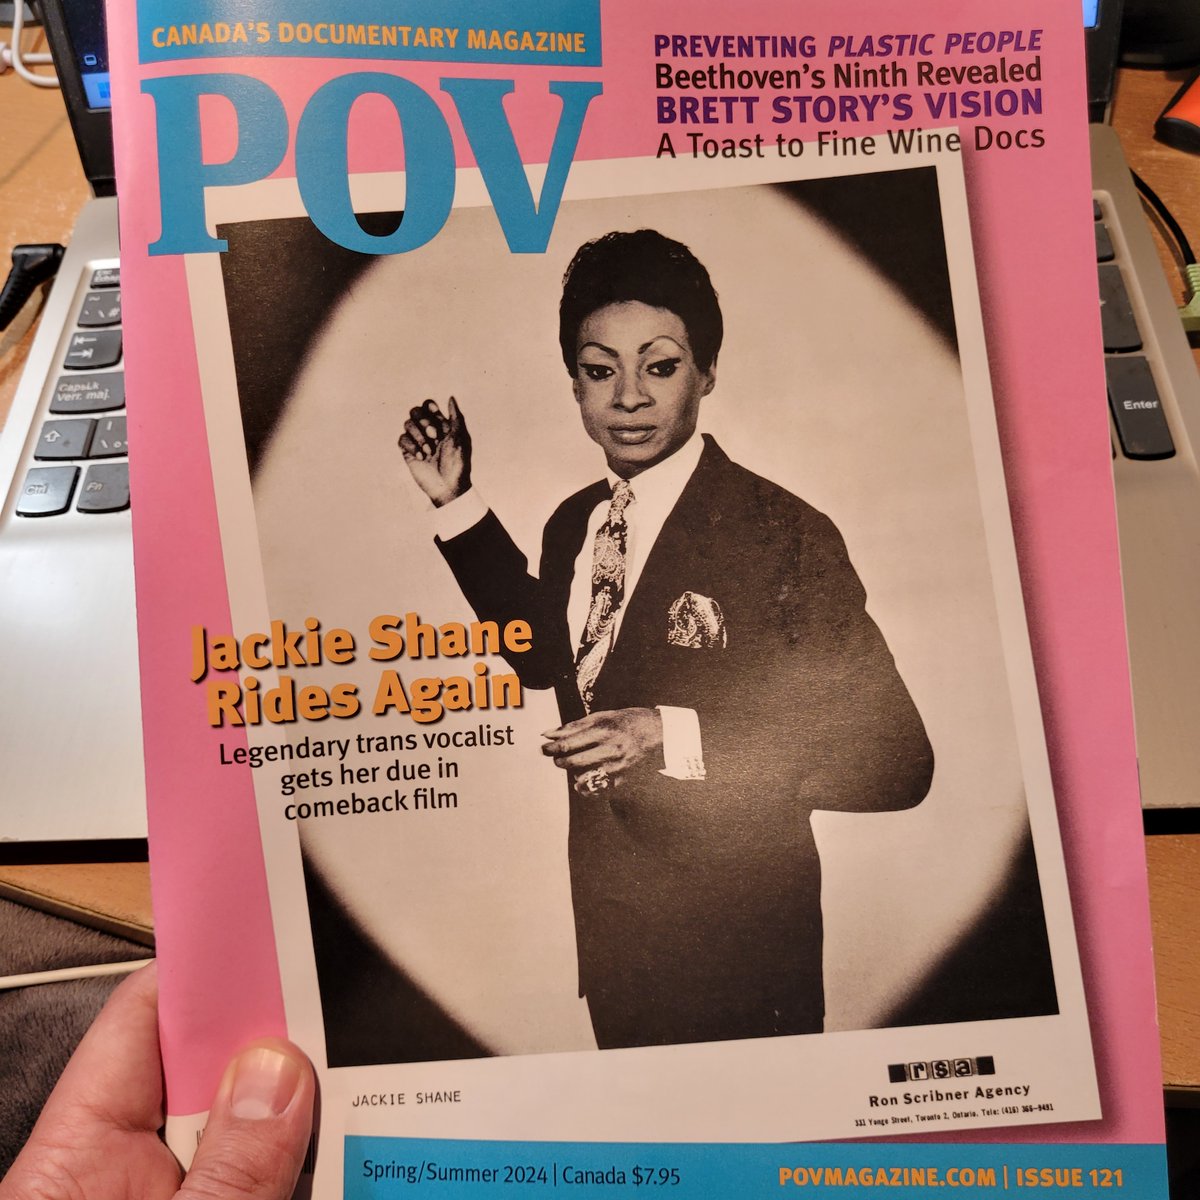 Fresh from the printer! #POV121 is now en route to subscribers. Here's a taste of what's inside, including lots of films coming to @HotDocs & @DOXAFestival!